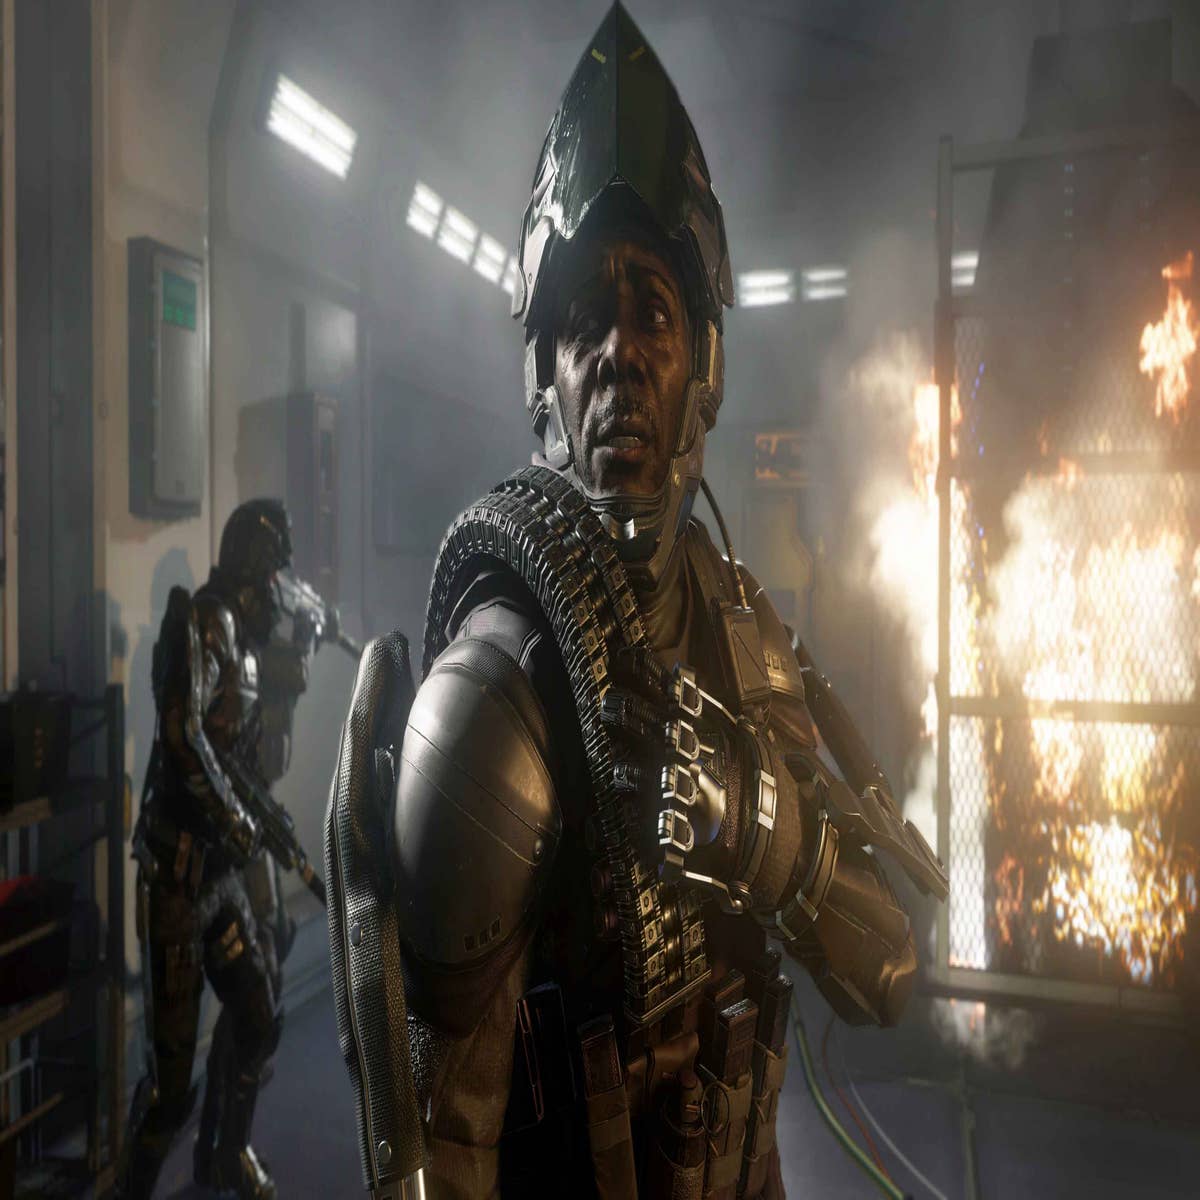 Call of Duty: Advanced Warfare is having download issues on